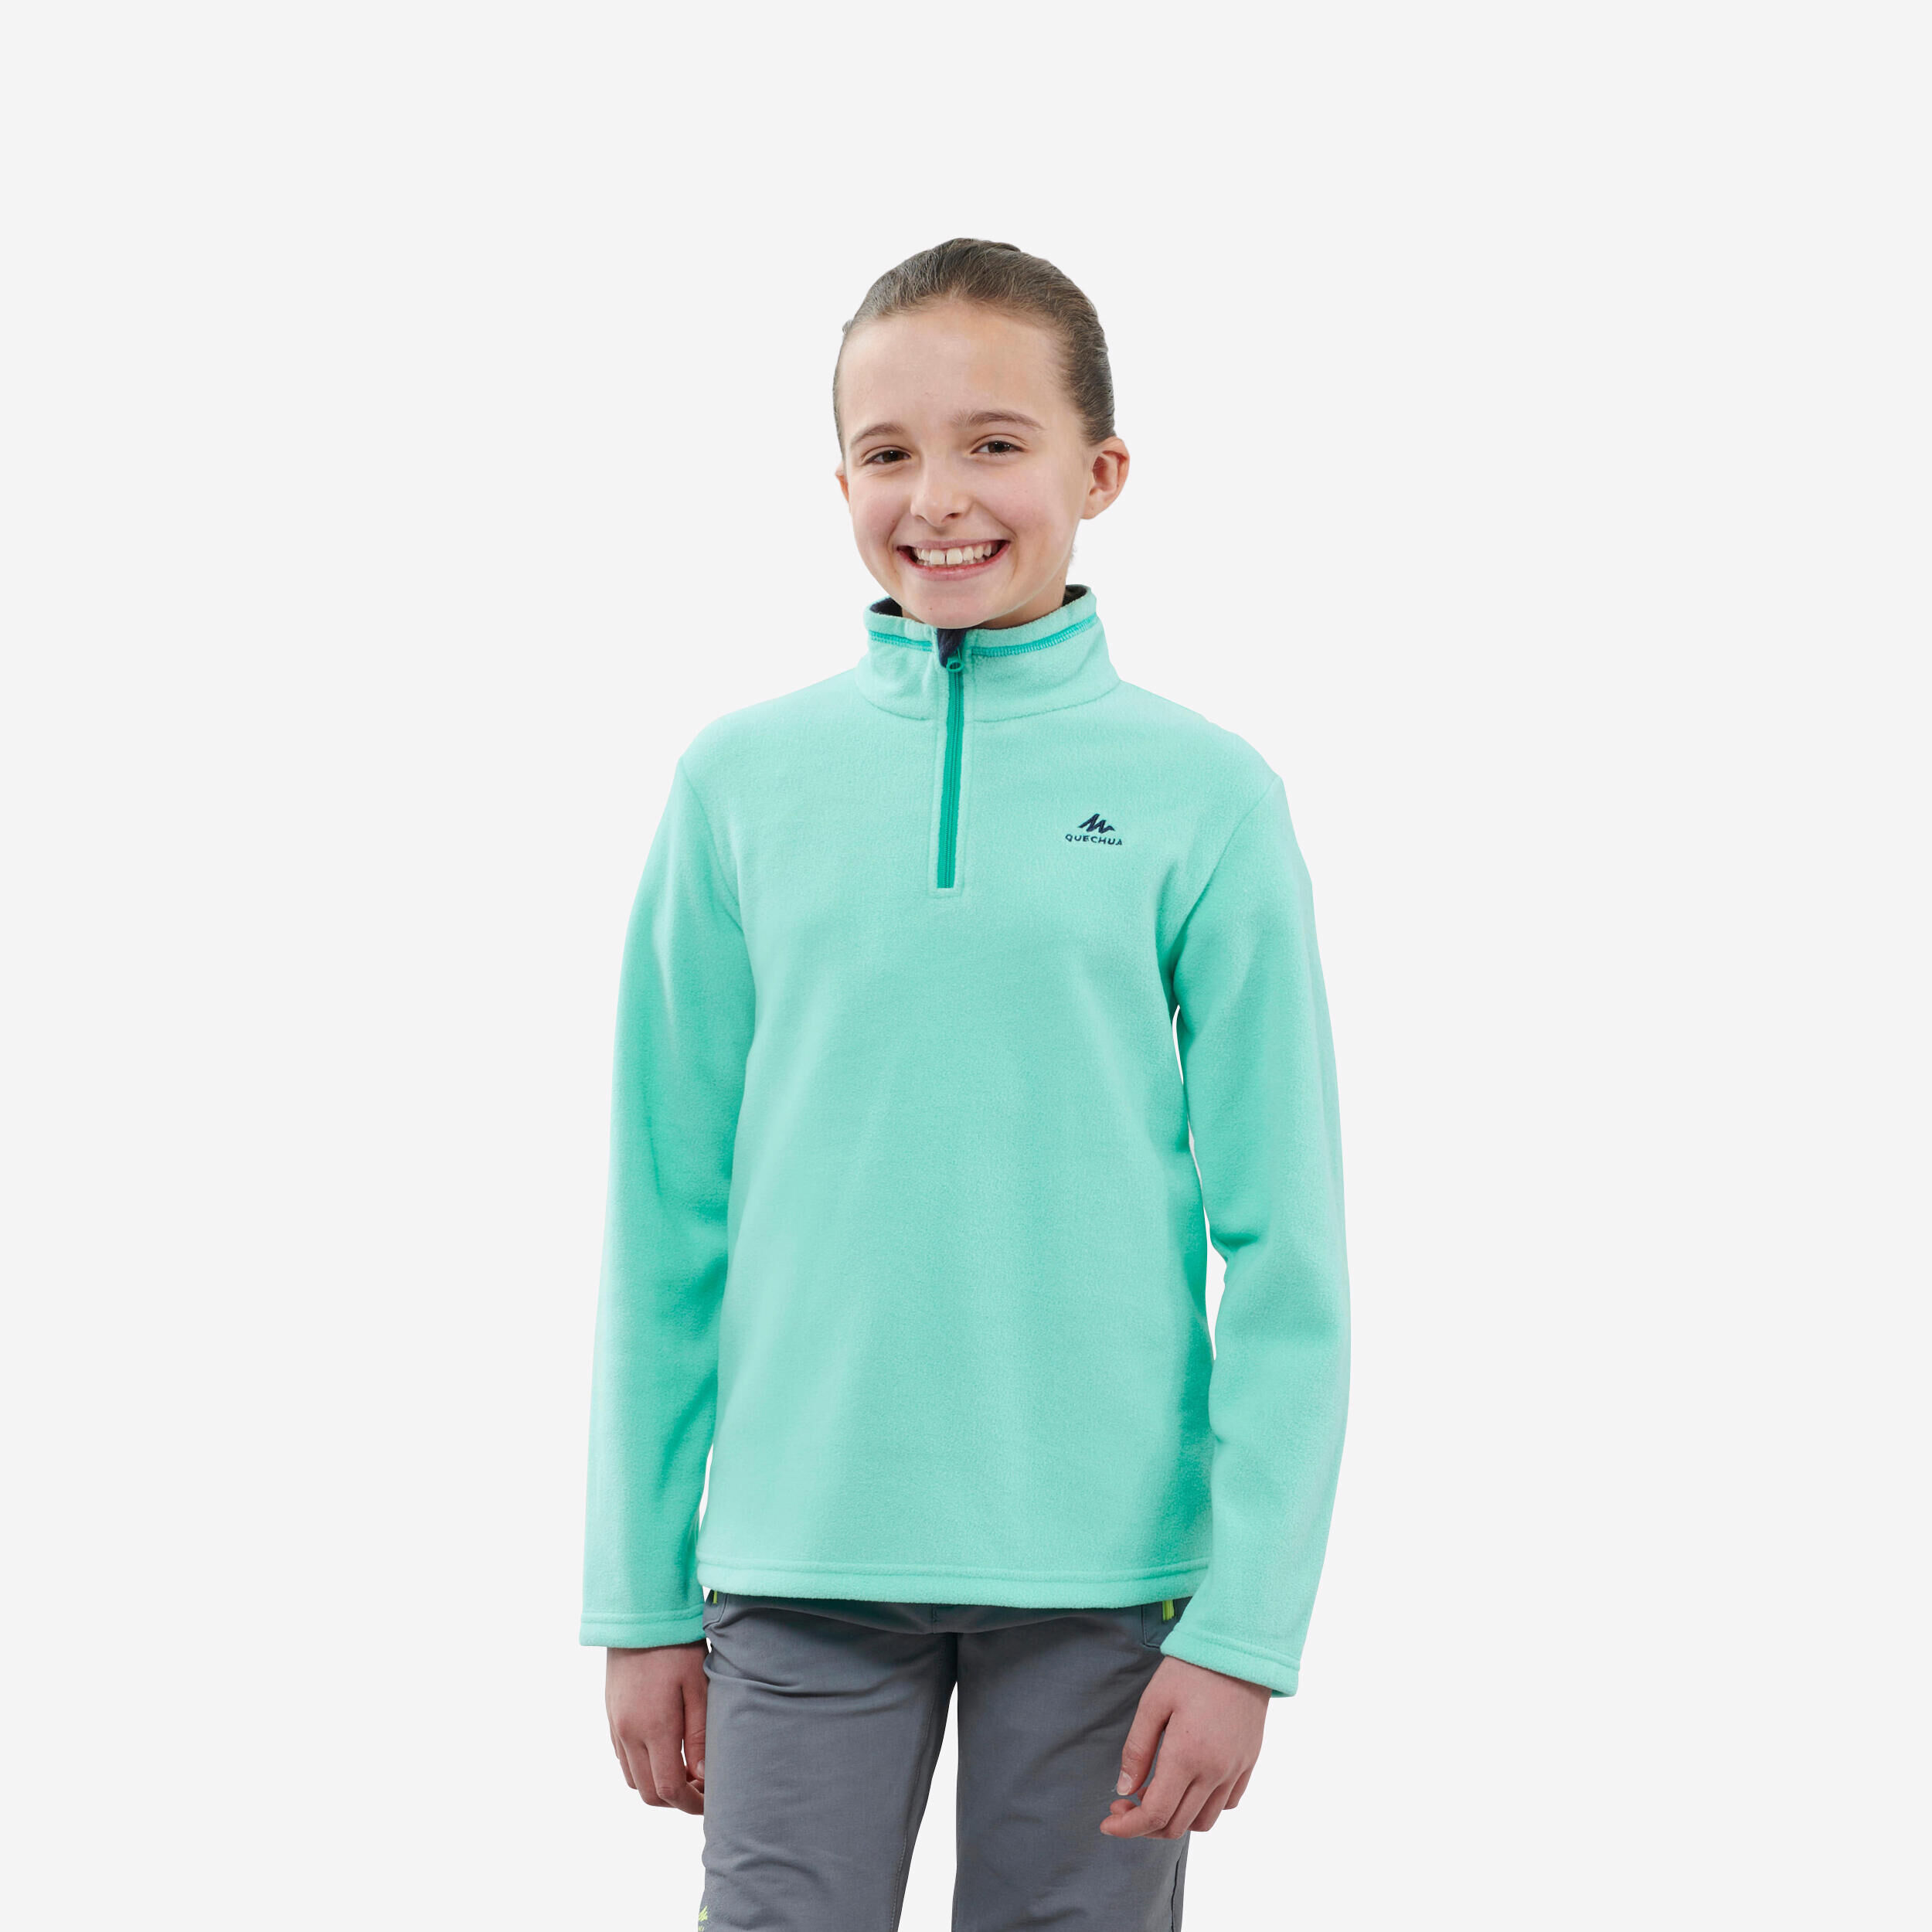 QUECHUA Kids’ Hiking Fleece - MH100 Aged 7-15 - Turquoise